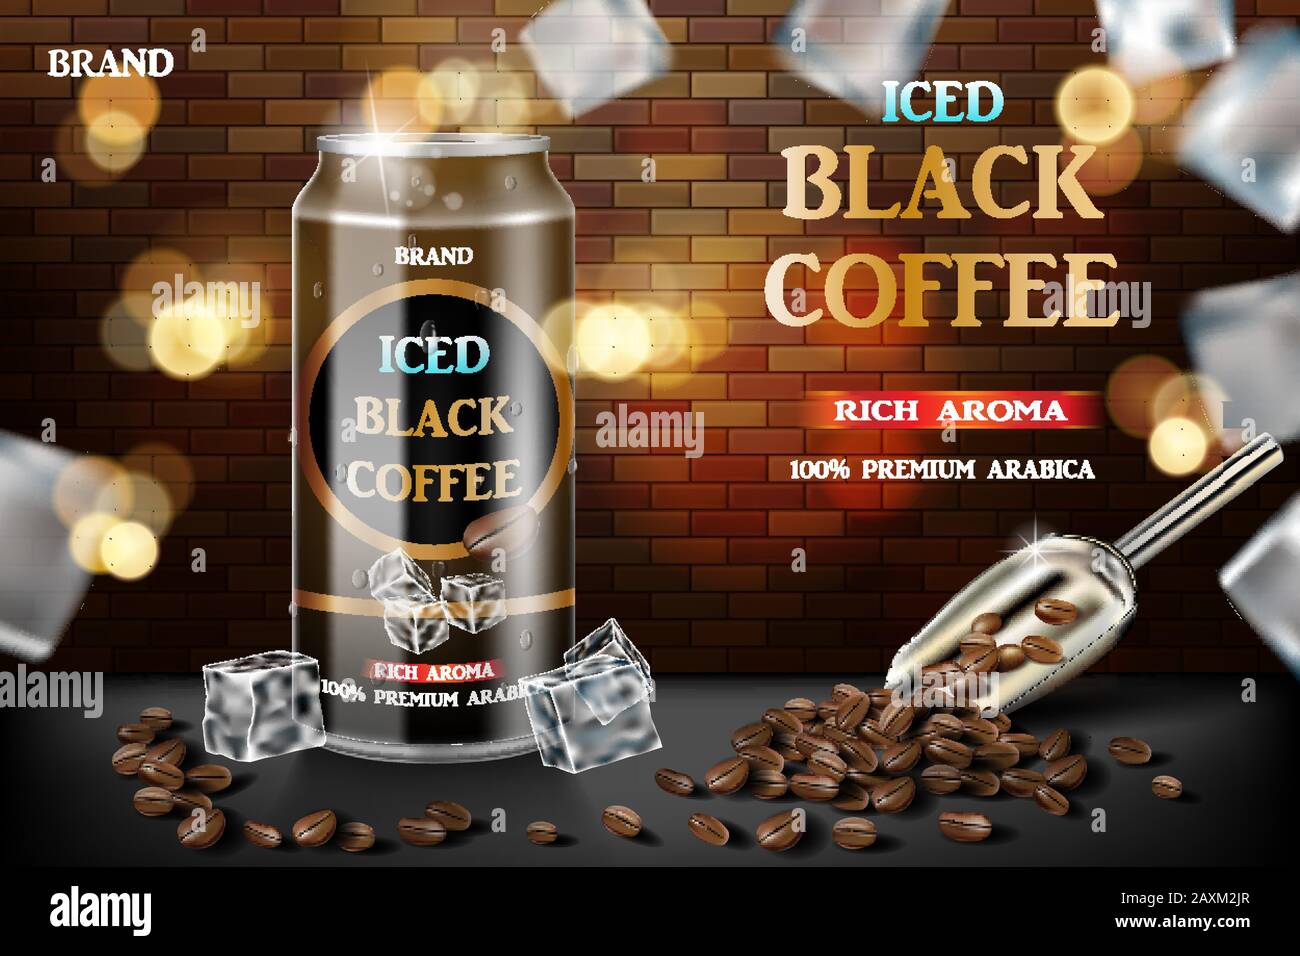 Realistic black canned coffee with beans and ice cubes in 3d illustration. Product coffee drink design with brick background. Vector Stock Vector